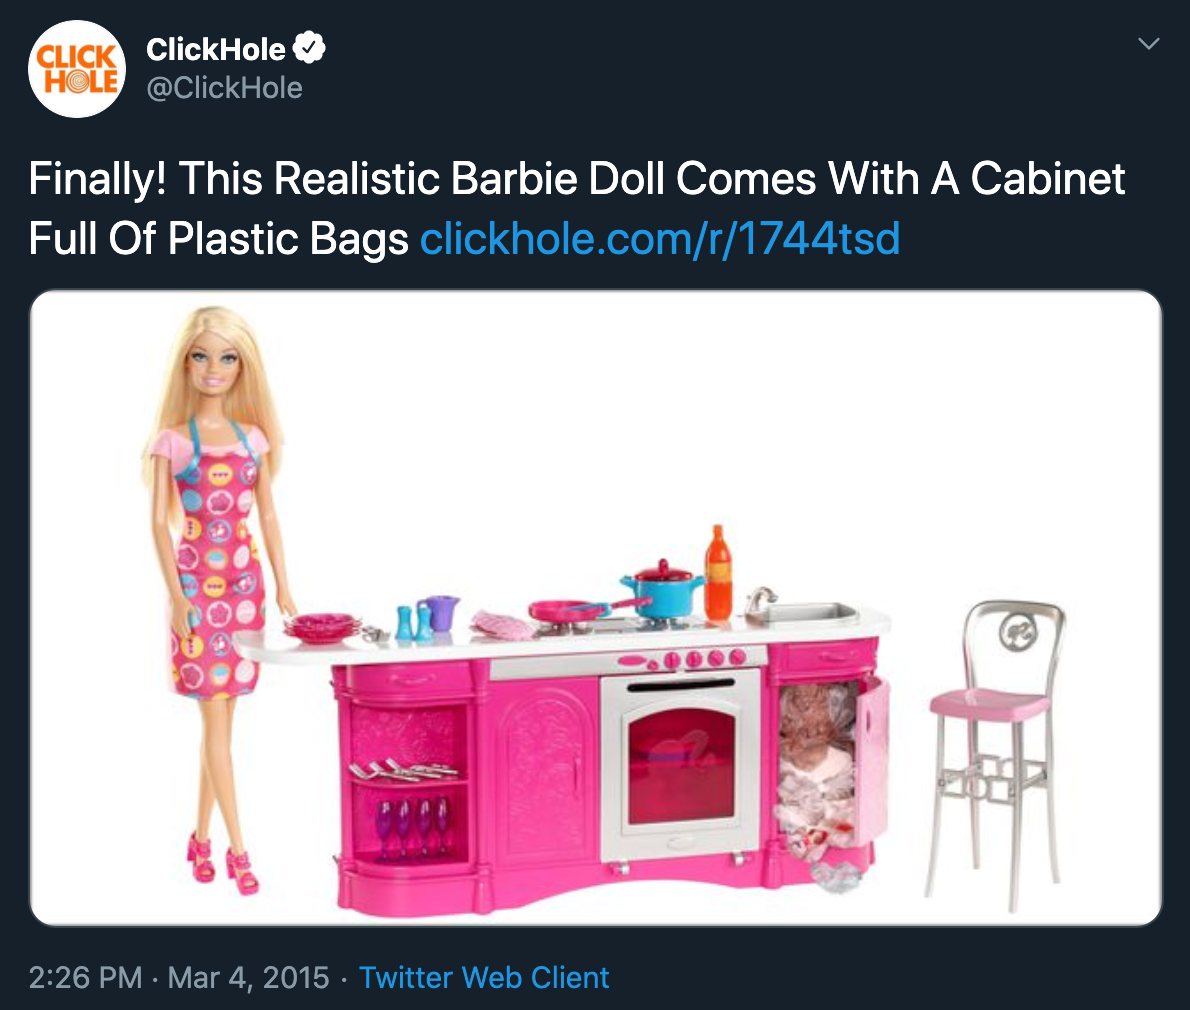 clickhole headlines - Finally! This Realistic Barbie Doll Comes With A Cabinet Full Of Plastic Bags